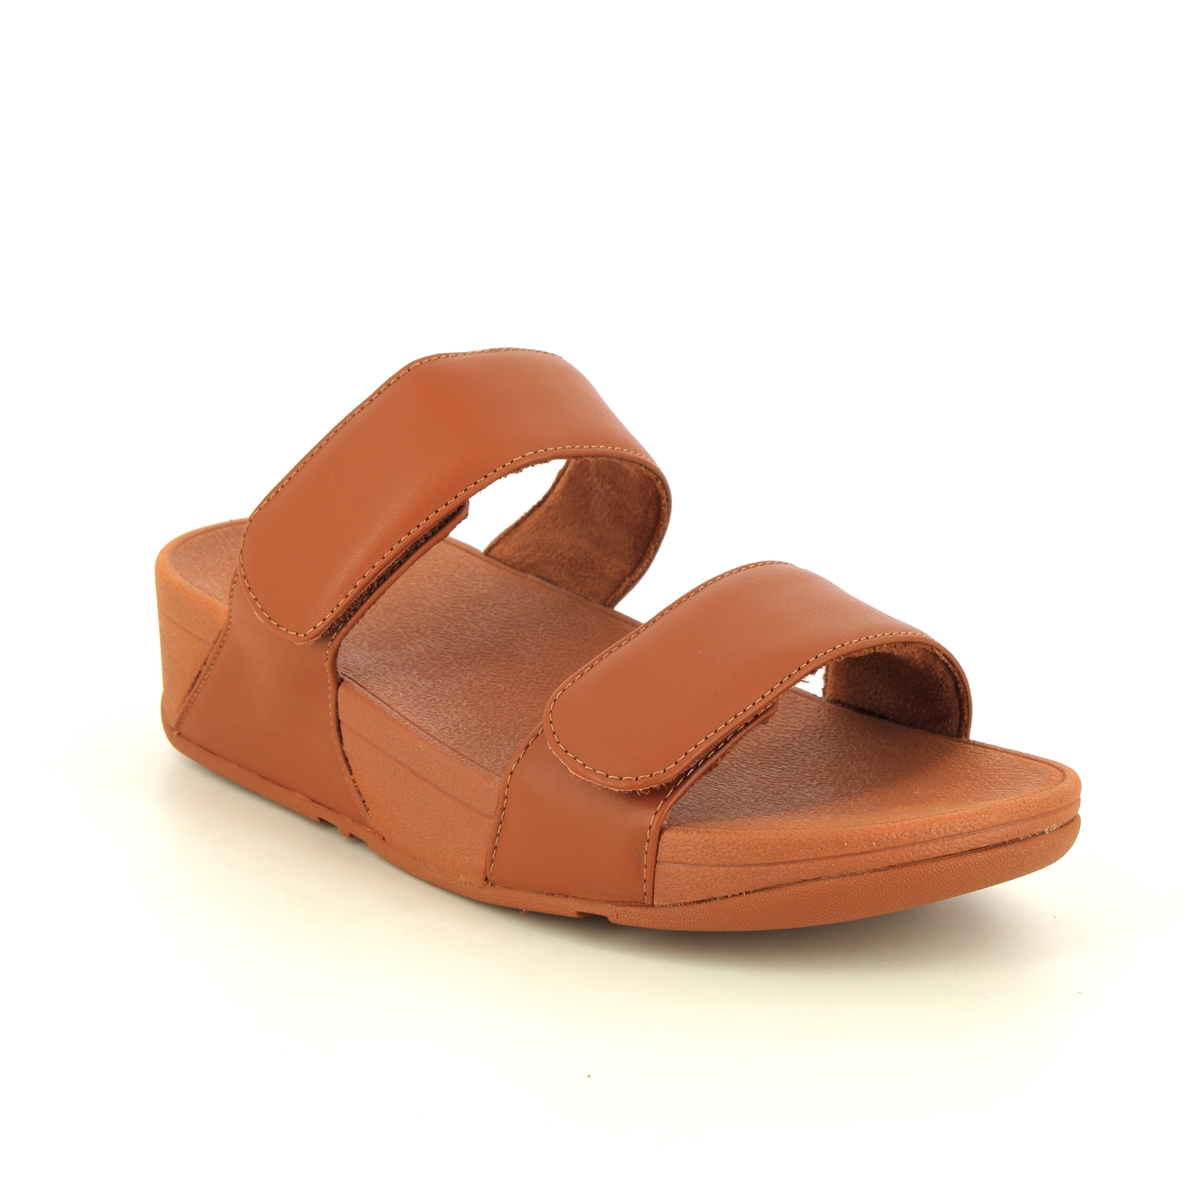 Fitflop Lulu Leather 2v Tan Leather Womens Slide Sandals 0FV6-592 in a Plain Leather in Size 7